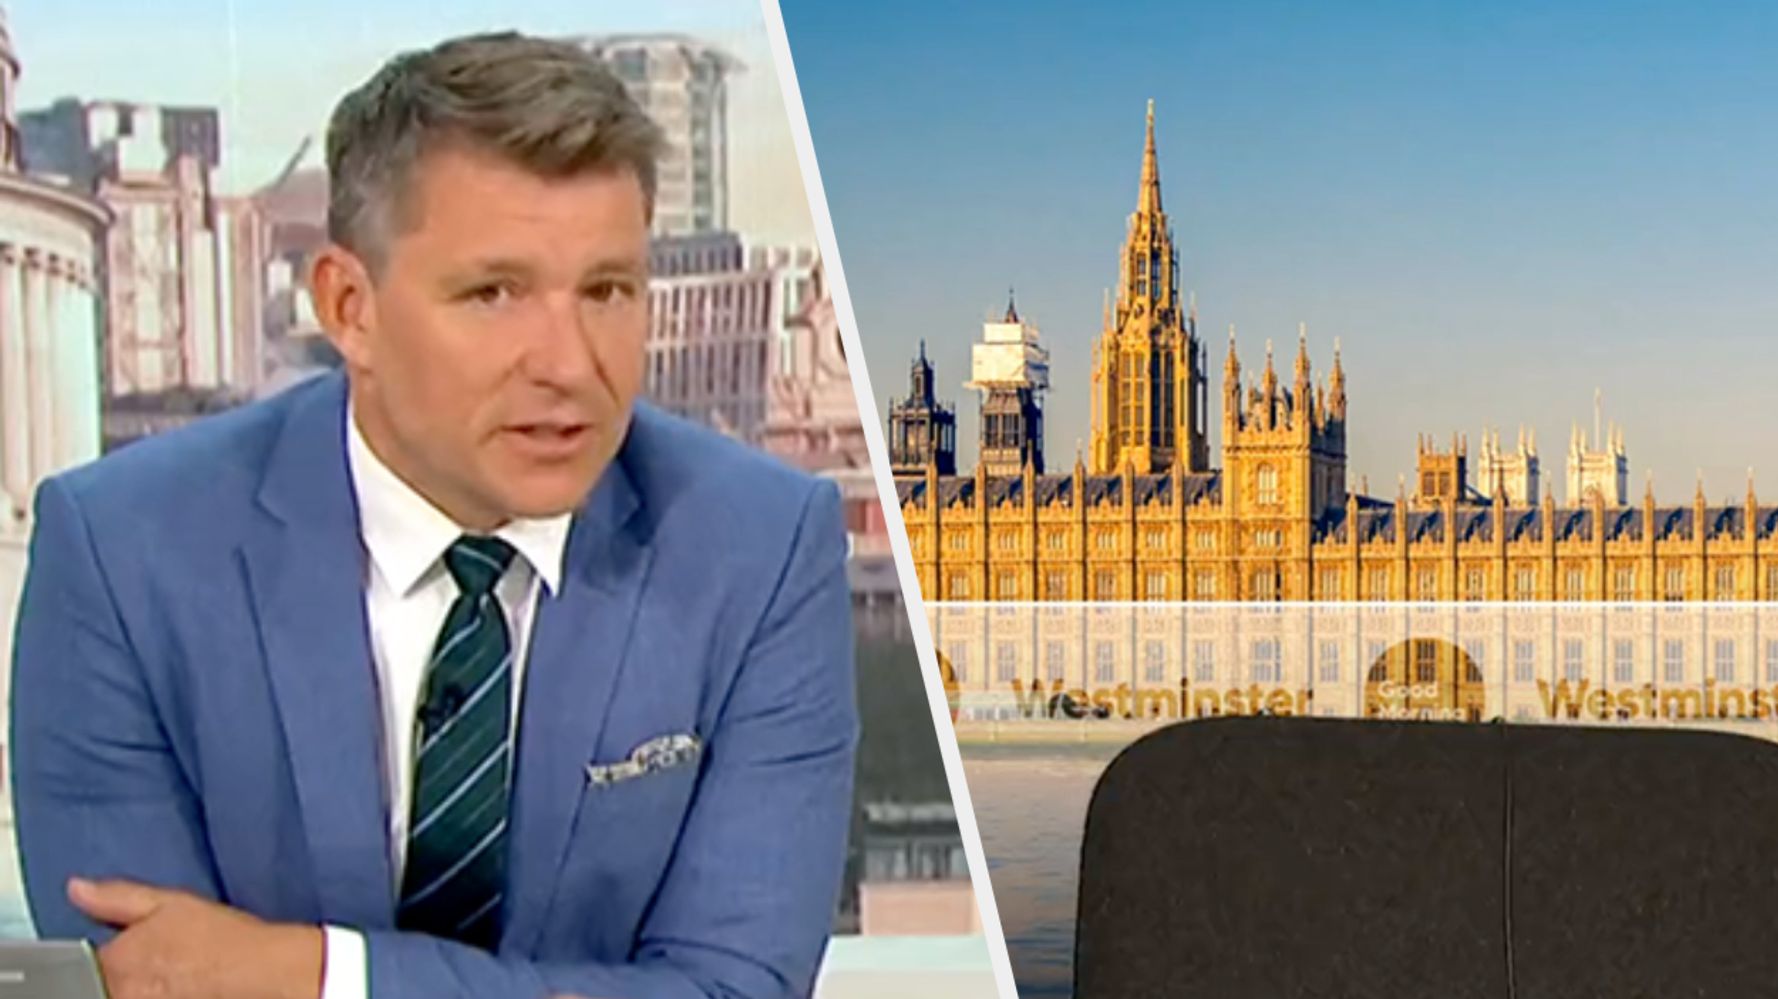 Good Morning Britain Empty-Chairs Tory MP Who Skipped Interview Despite Bleak Recession Forecast